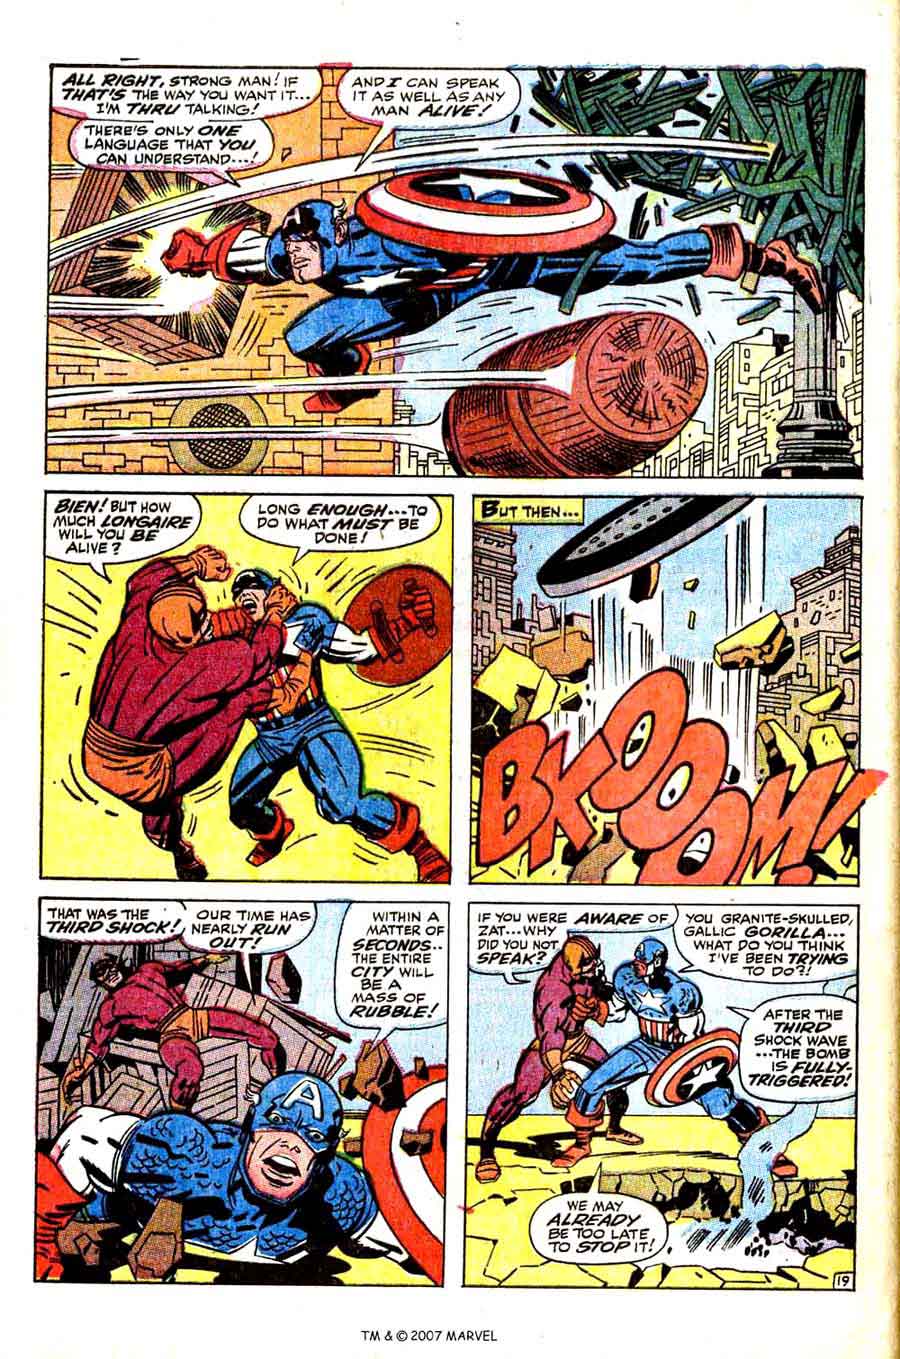 Captain America v1 #105 marvel comic book page art by Jack Kirby